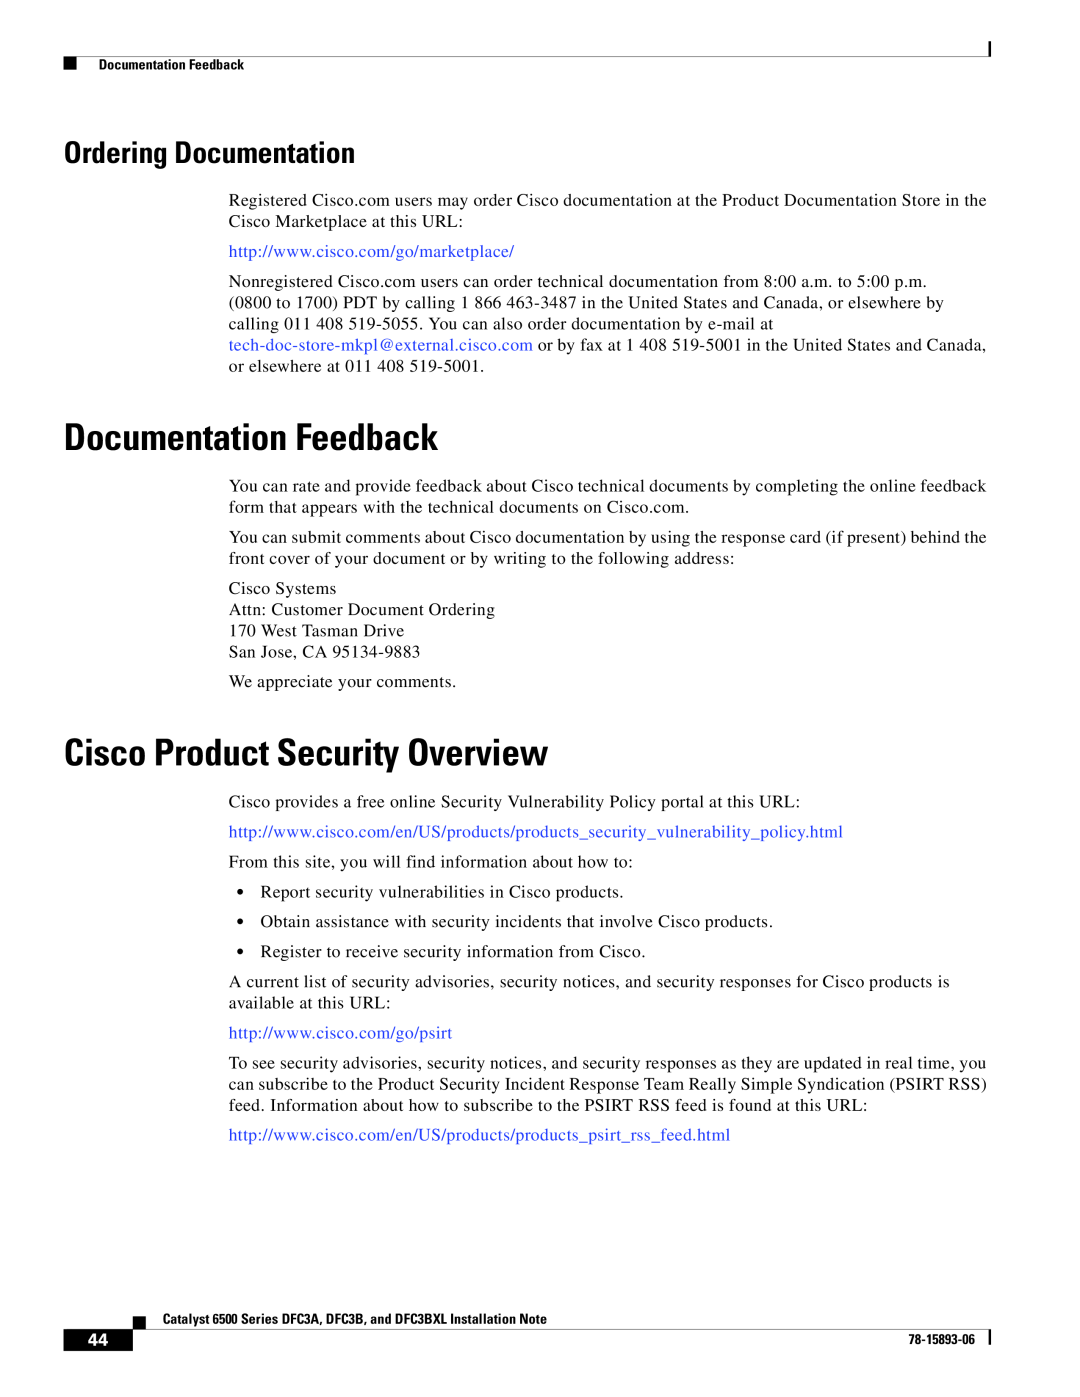 Cisco Systems DFC3A, DFC3BXL manual Documentation Feedback, Cisco Product Security Overview, Ordering Documentation 